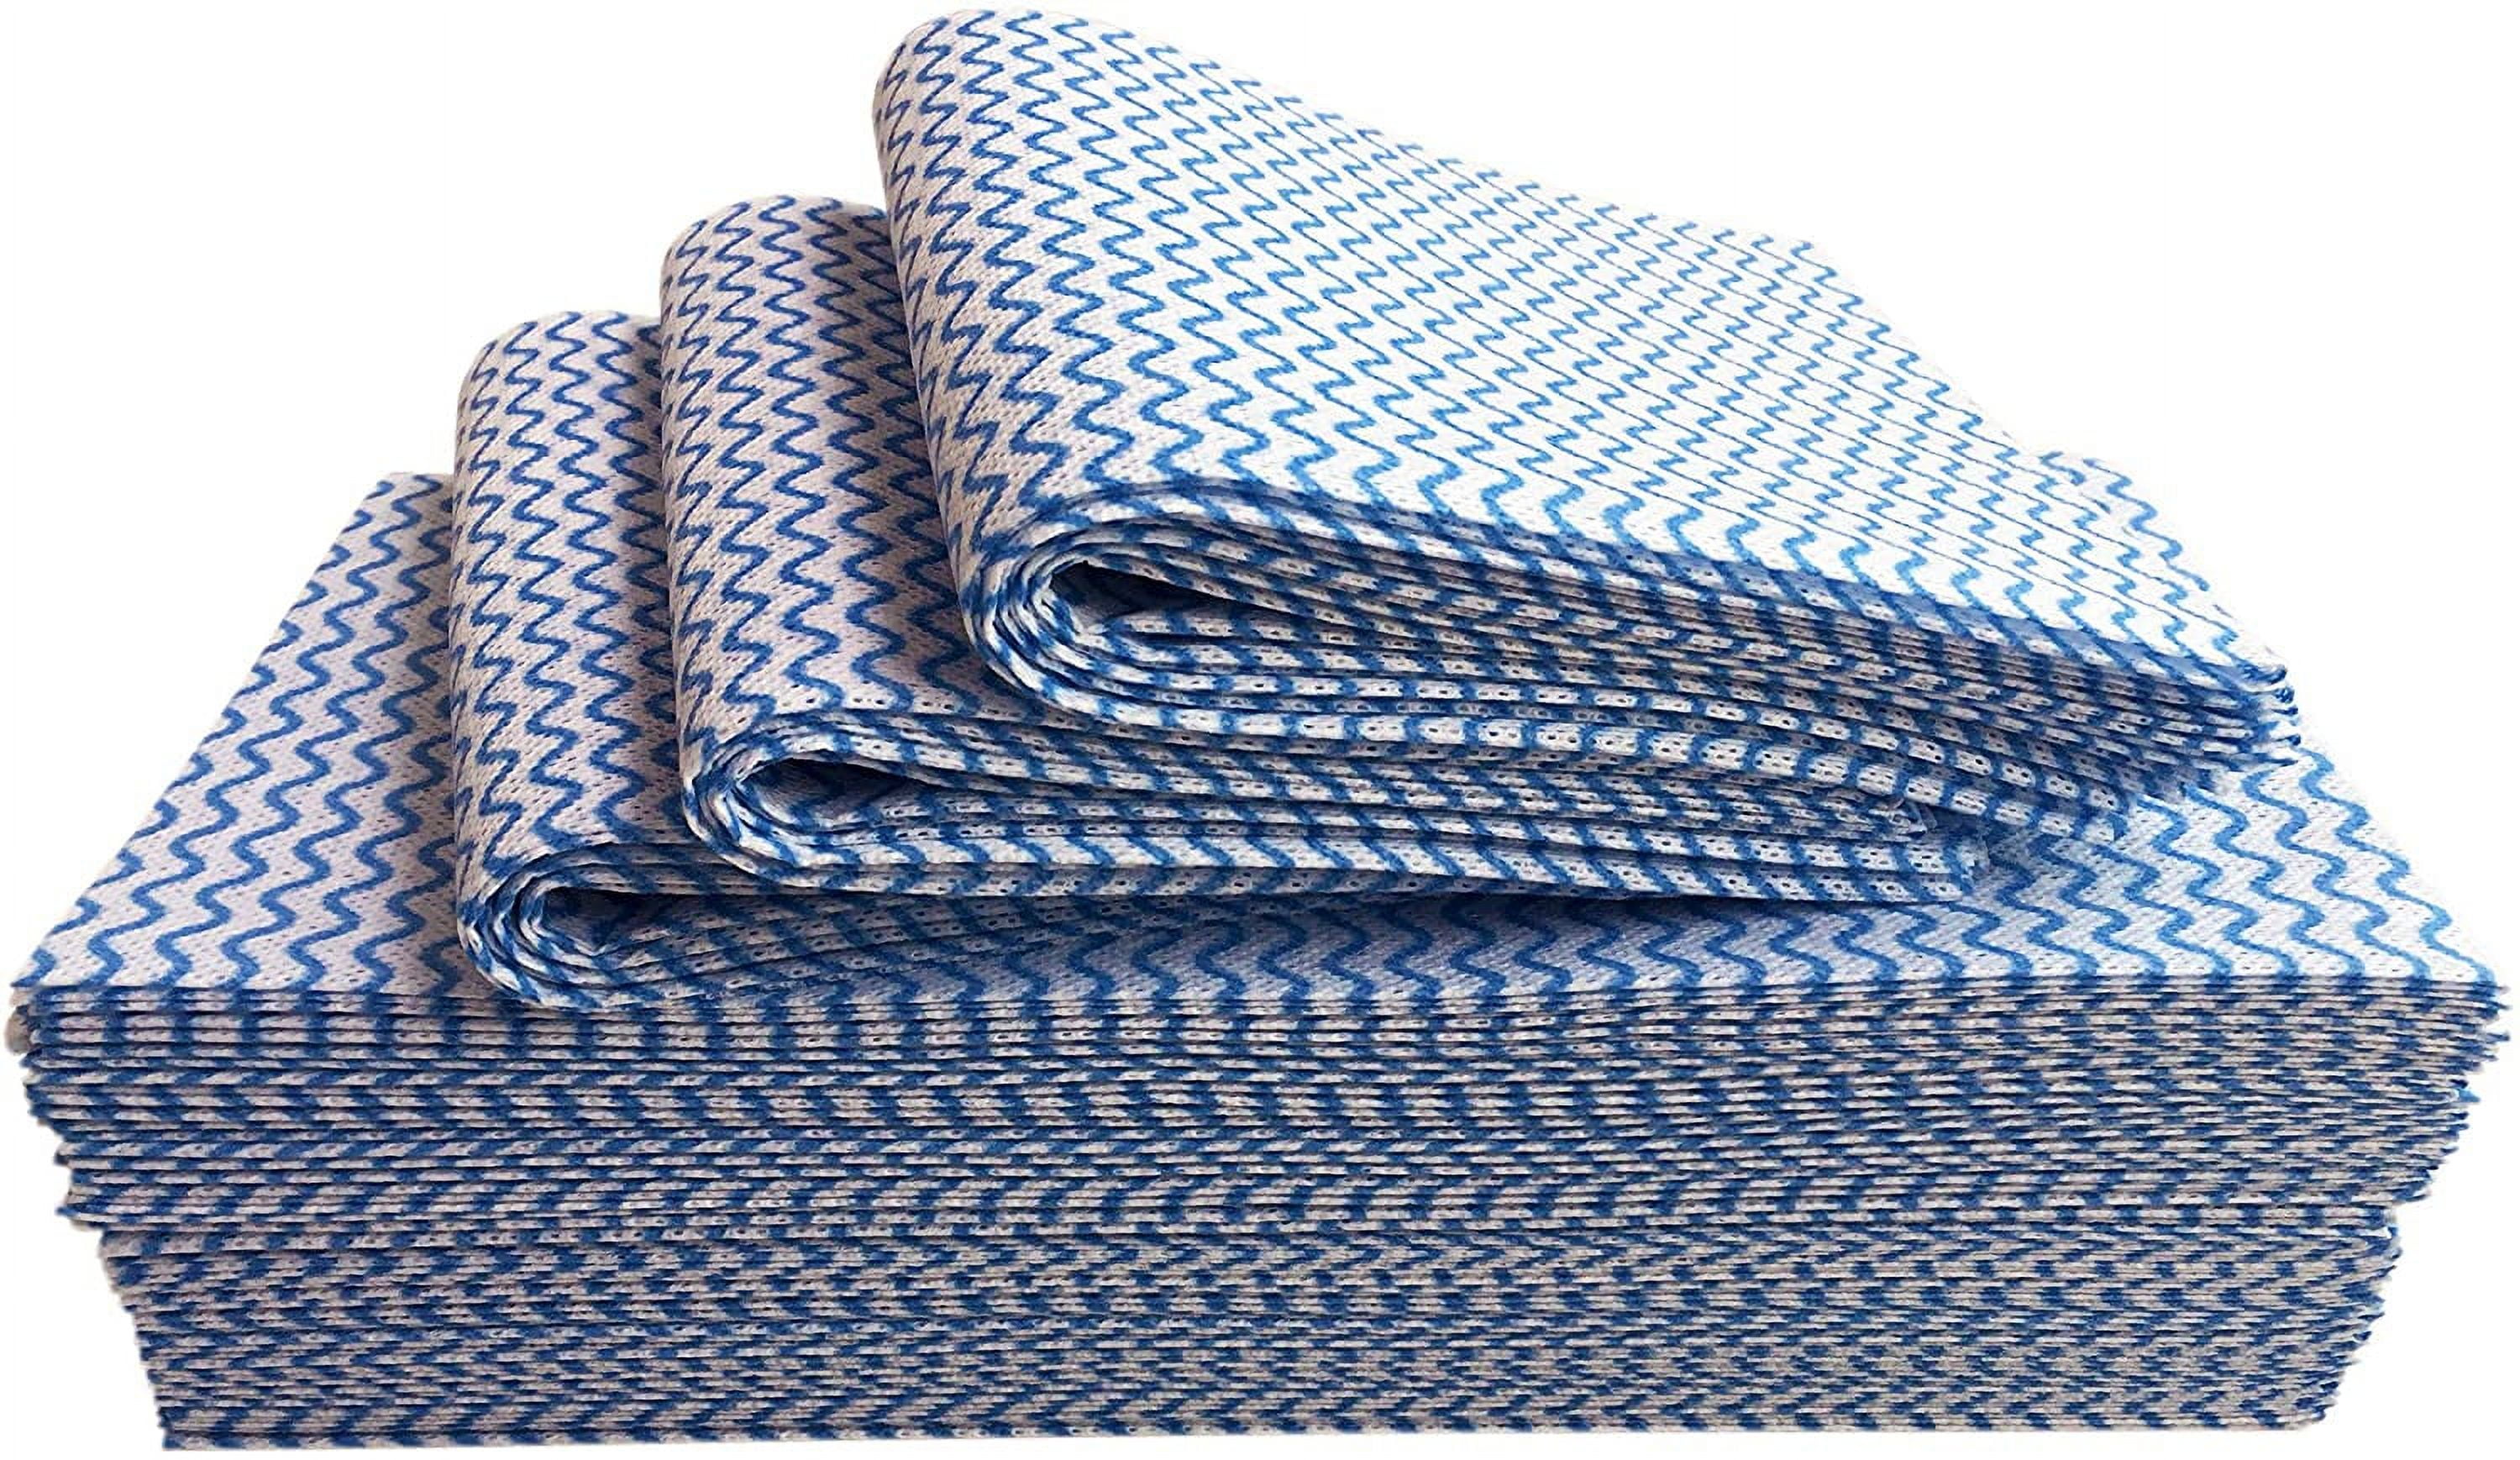 Nialnant 8 Pack Dish Rags,100% Cotton Dish Towels for Kitchen,Super  Absorbent Kitchen Dish Cloths,Dish Rags with Hanging Loop,12x12 Inches,Navy  Blue